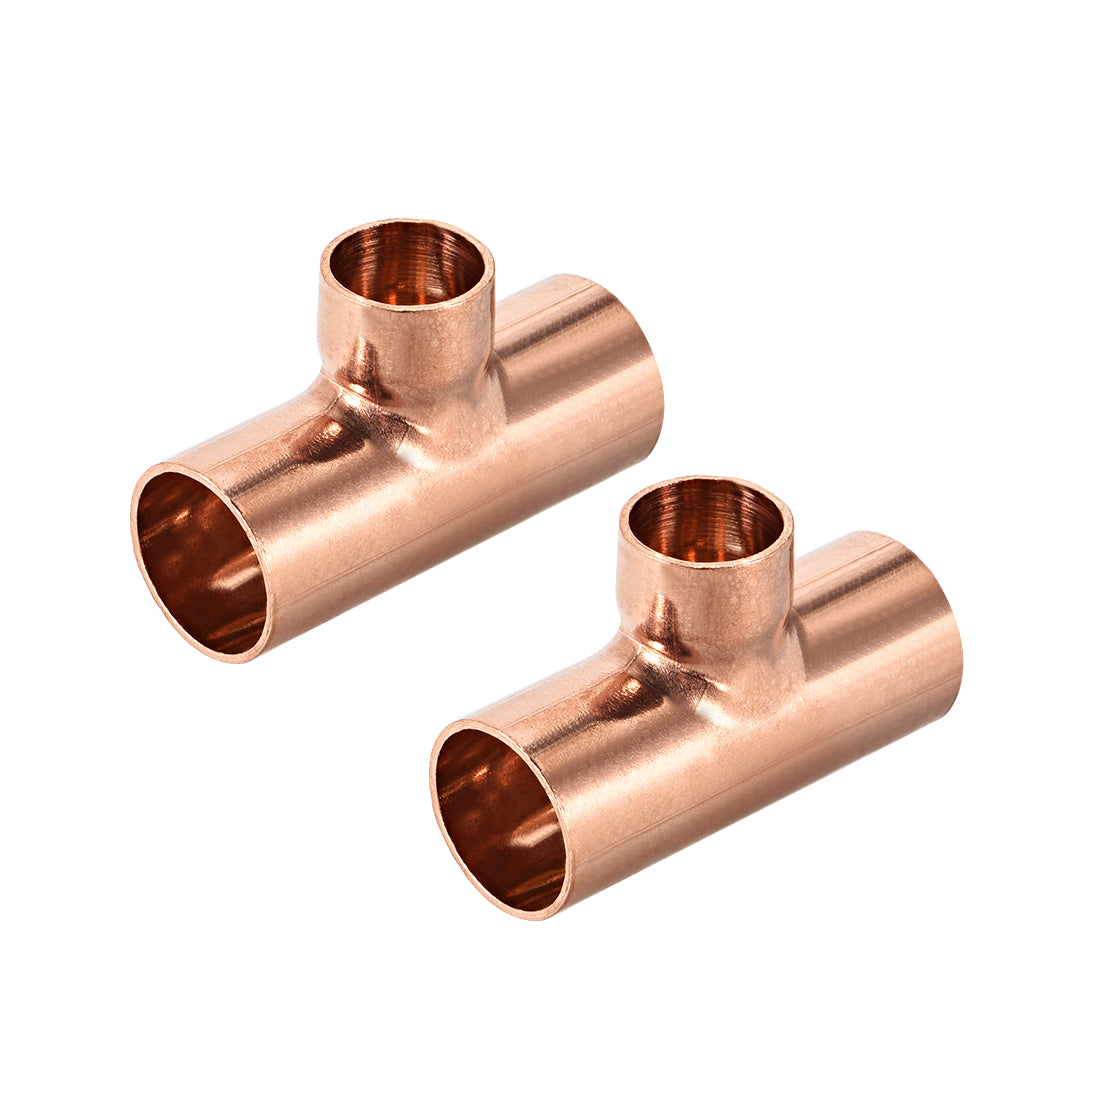 uxcell Uxcell 5/8-inch x 1/2-inch x 5/8-inch Copper Reducing Tee Copper Pressure Pipe Fitting Conector  for Plumbing Supply and Refrigeration 2pcs